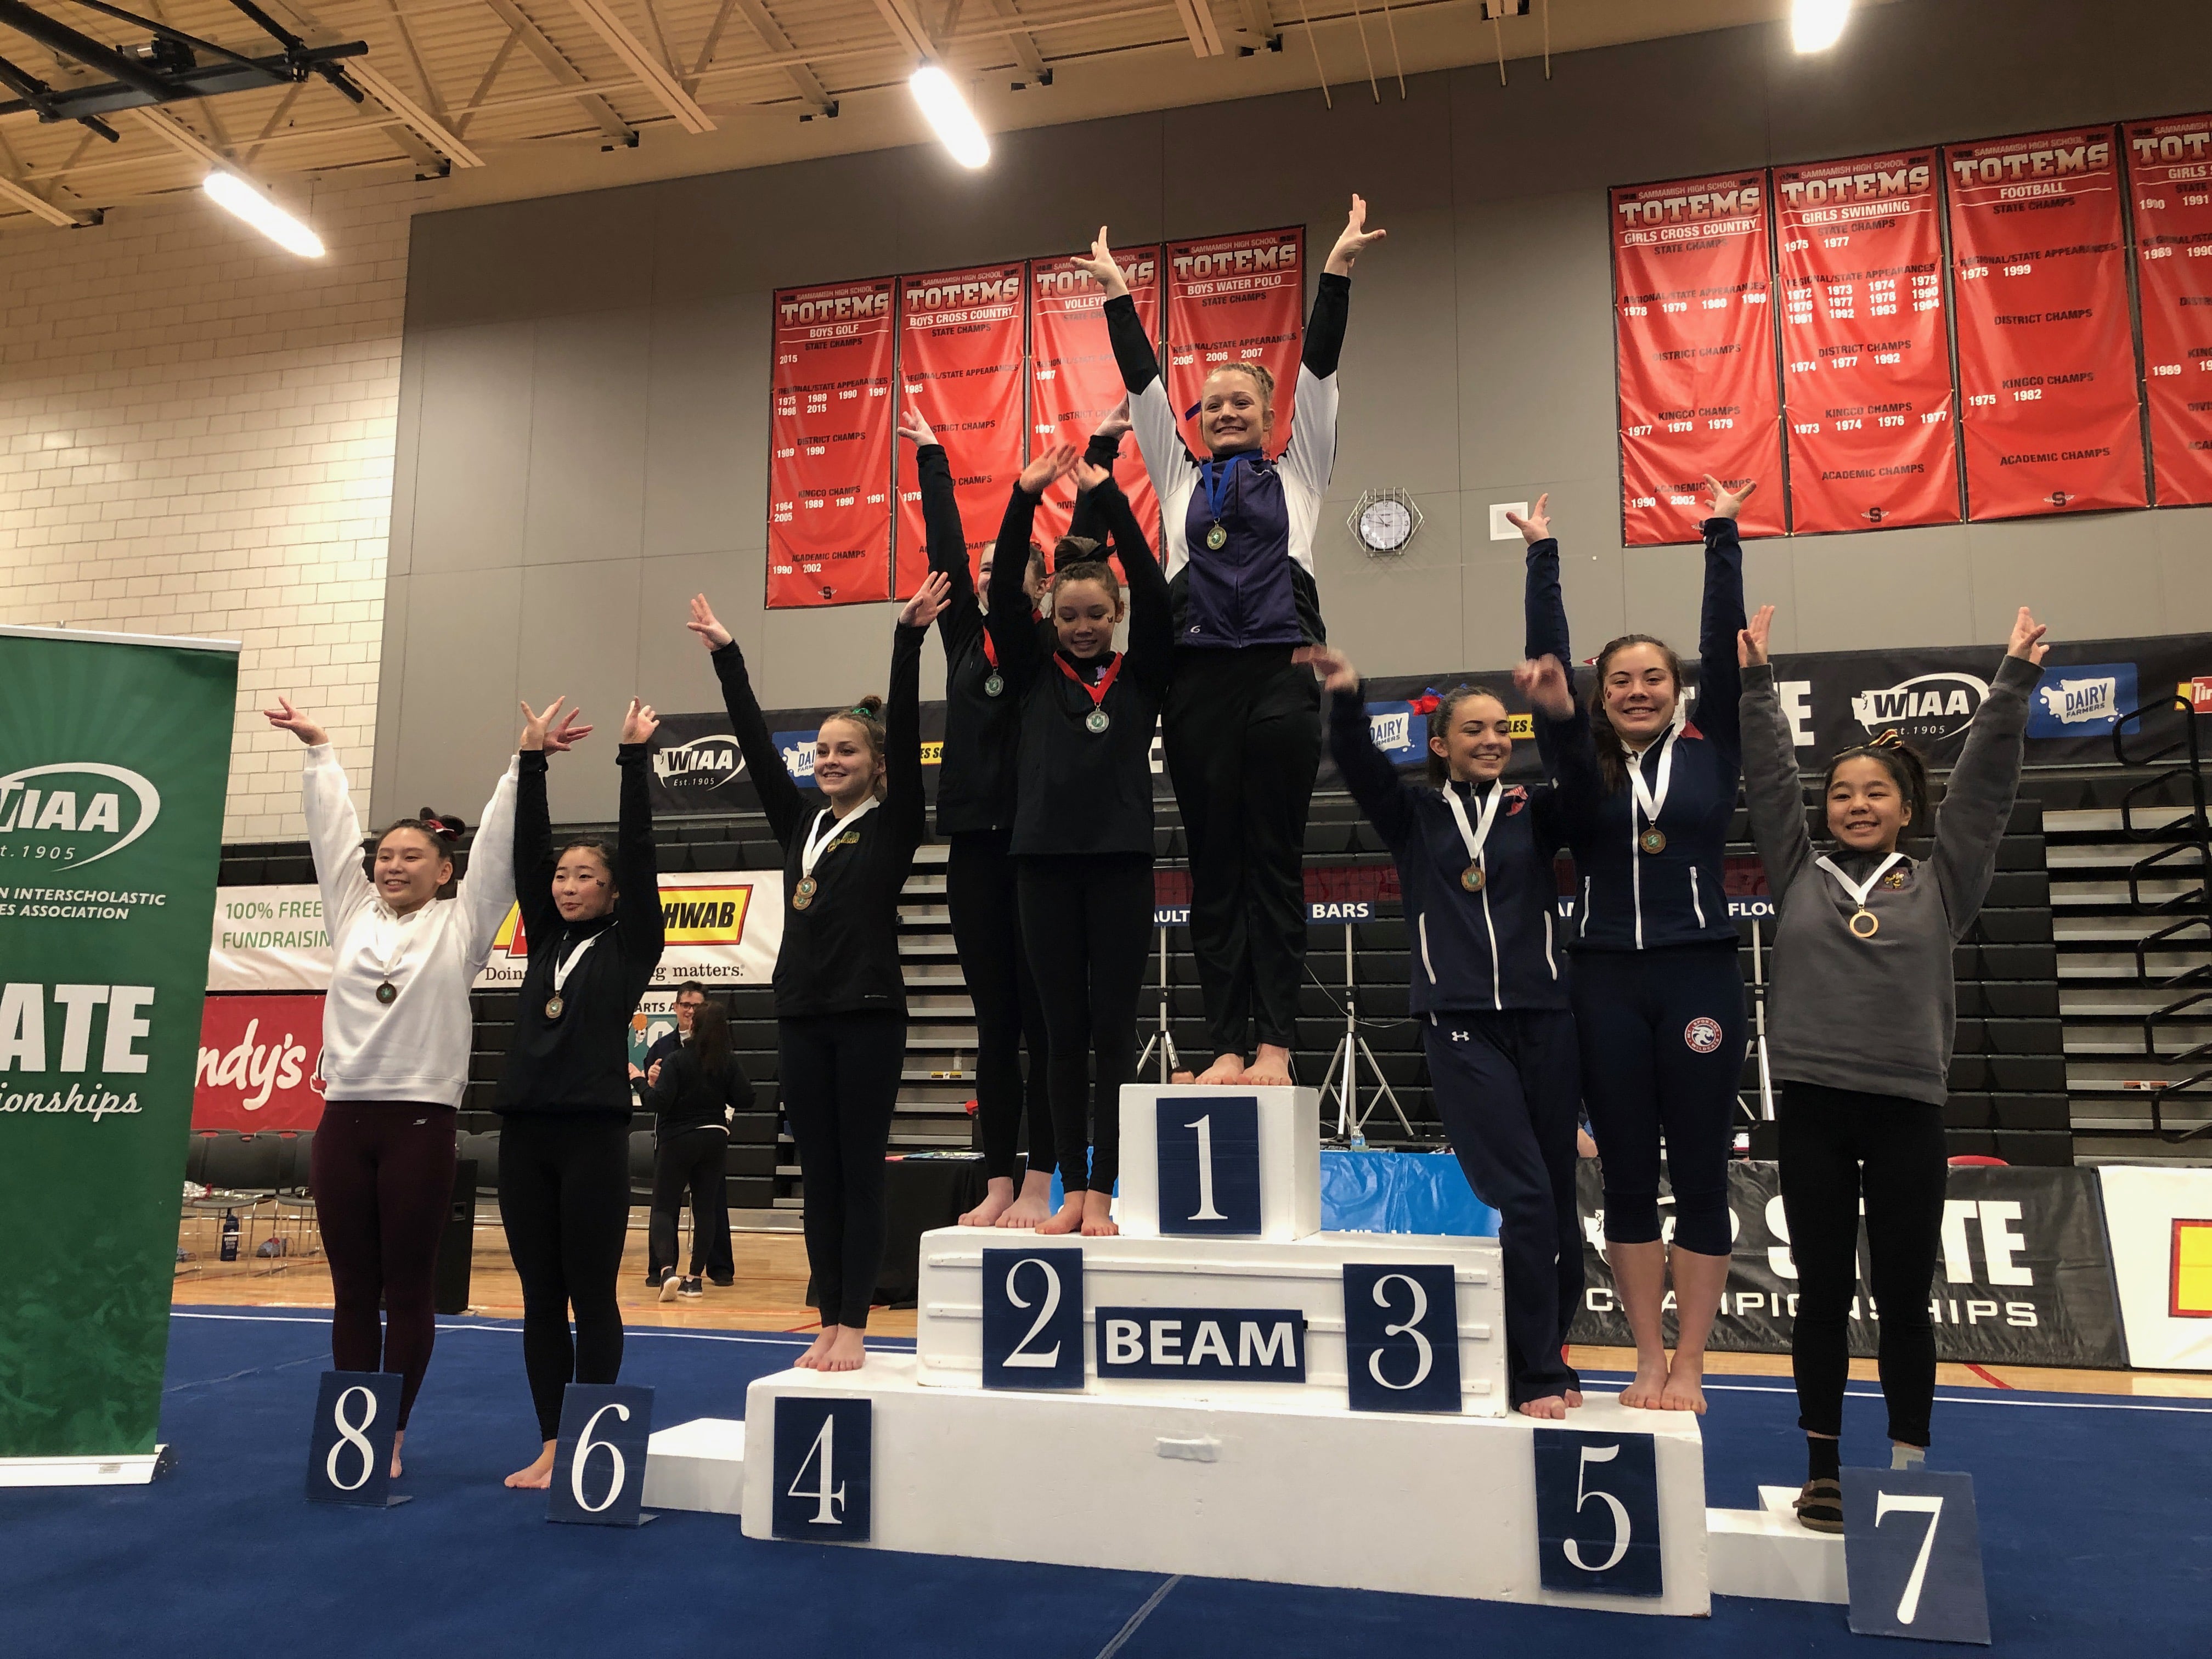 Columbia River's Grace Gordan stands atop the podium after winning a state championship on the balance beam at the 3A/2A/1A state gymnastics championship in Bellevue on Friday (Andy Buhler/The Columbian)